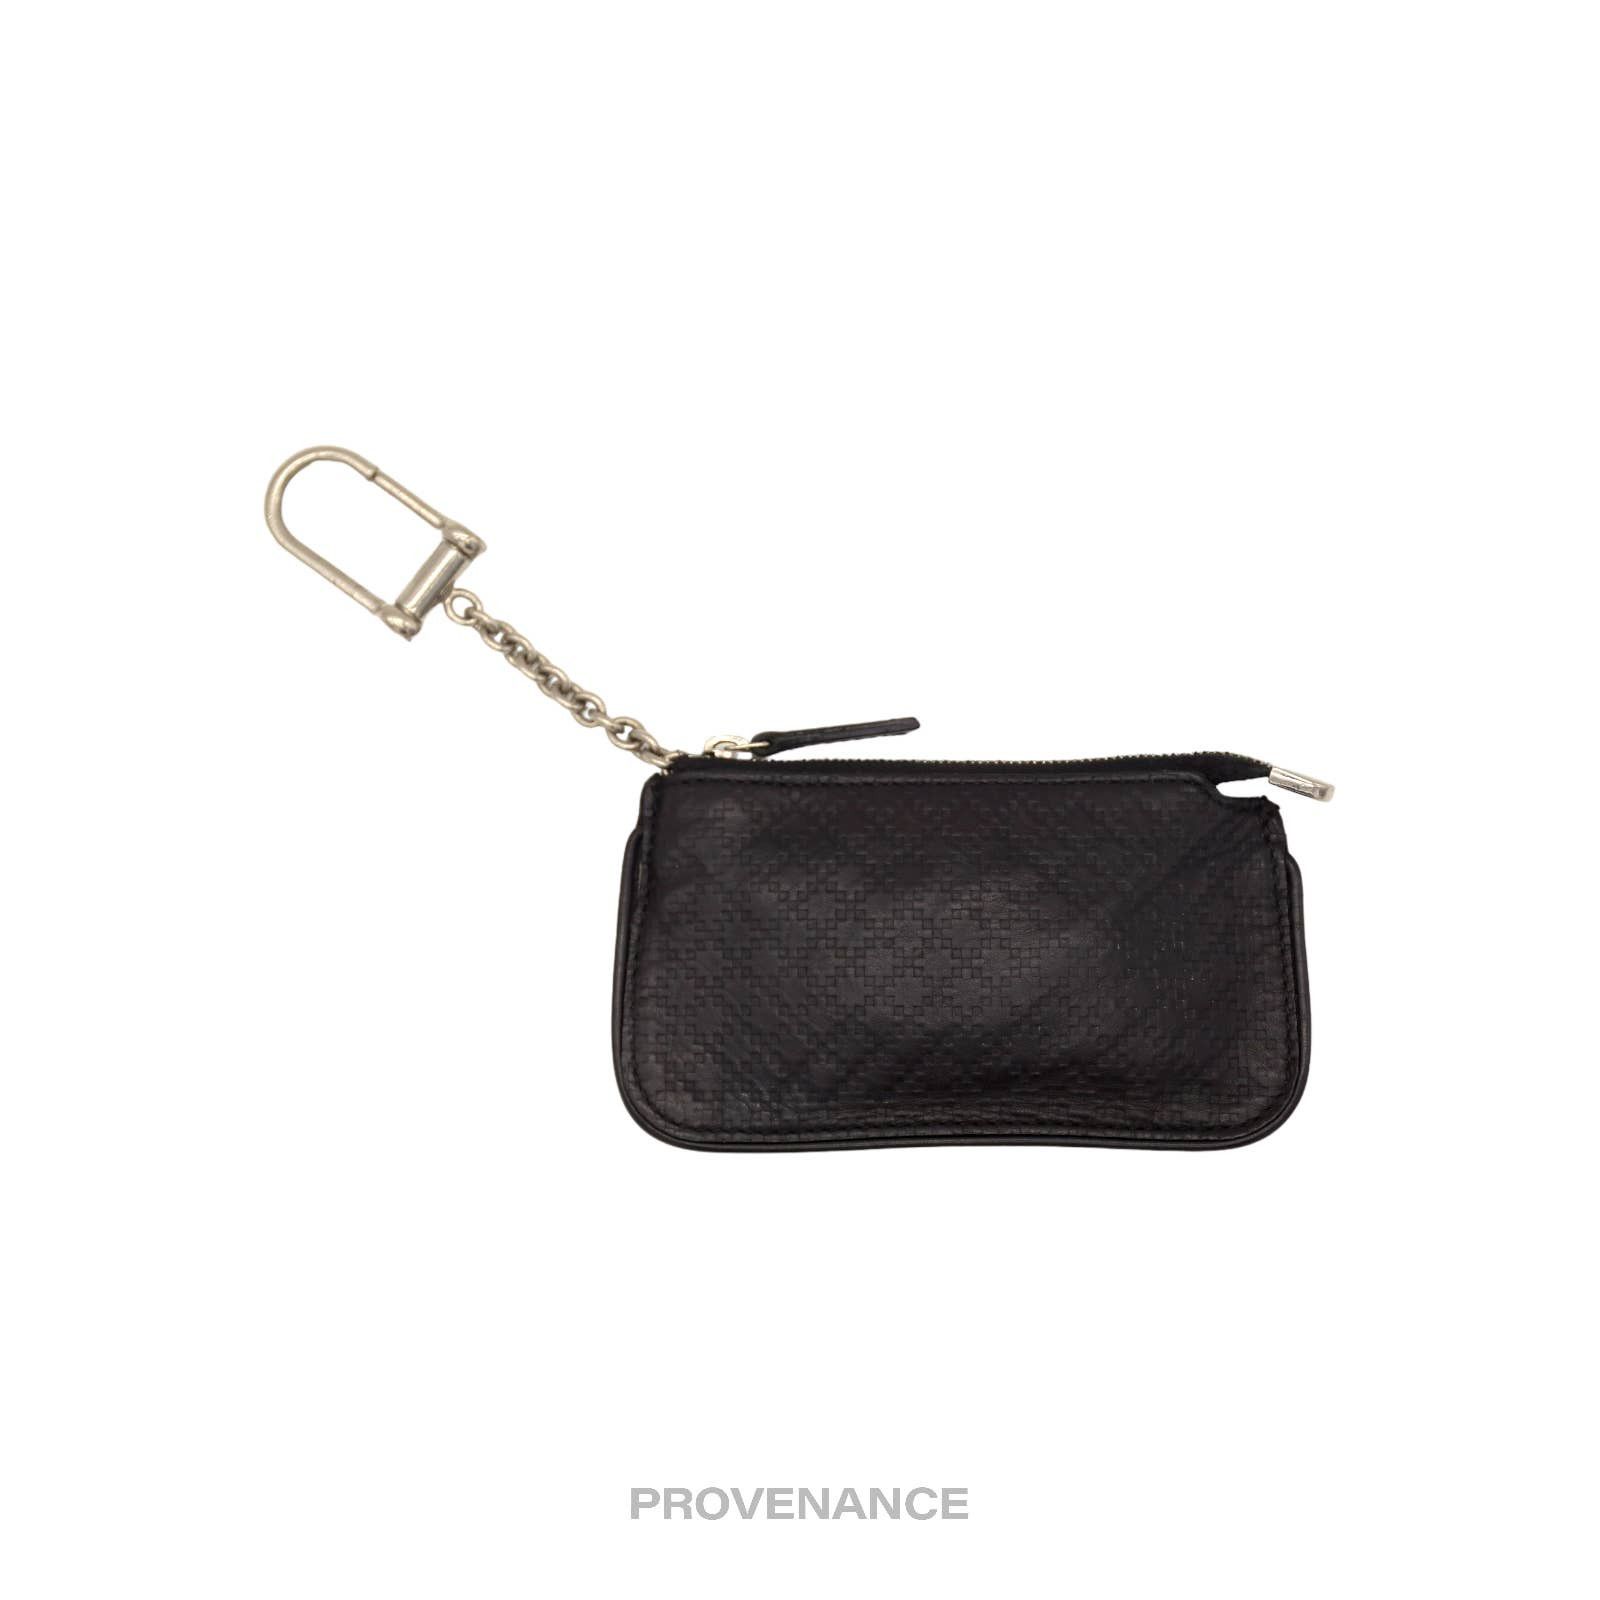 Gucci Black Patent 6 Key Holder Keychain Pouch 171ggs28